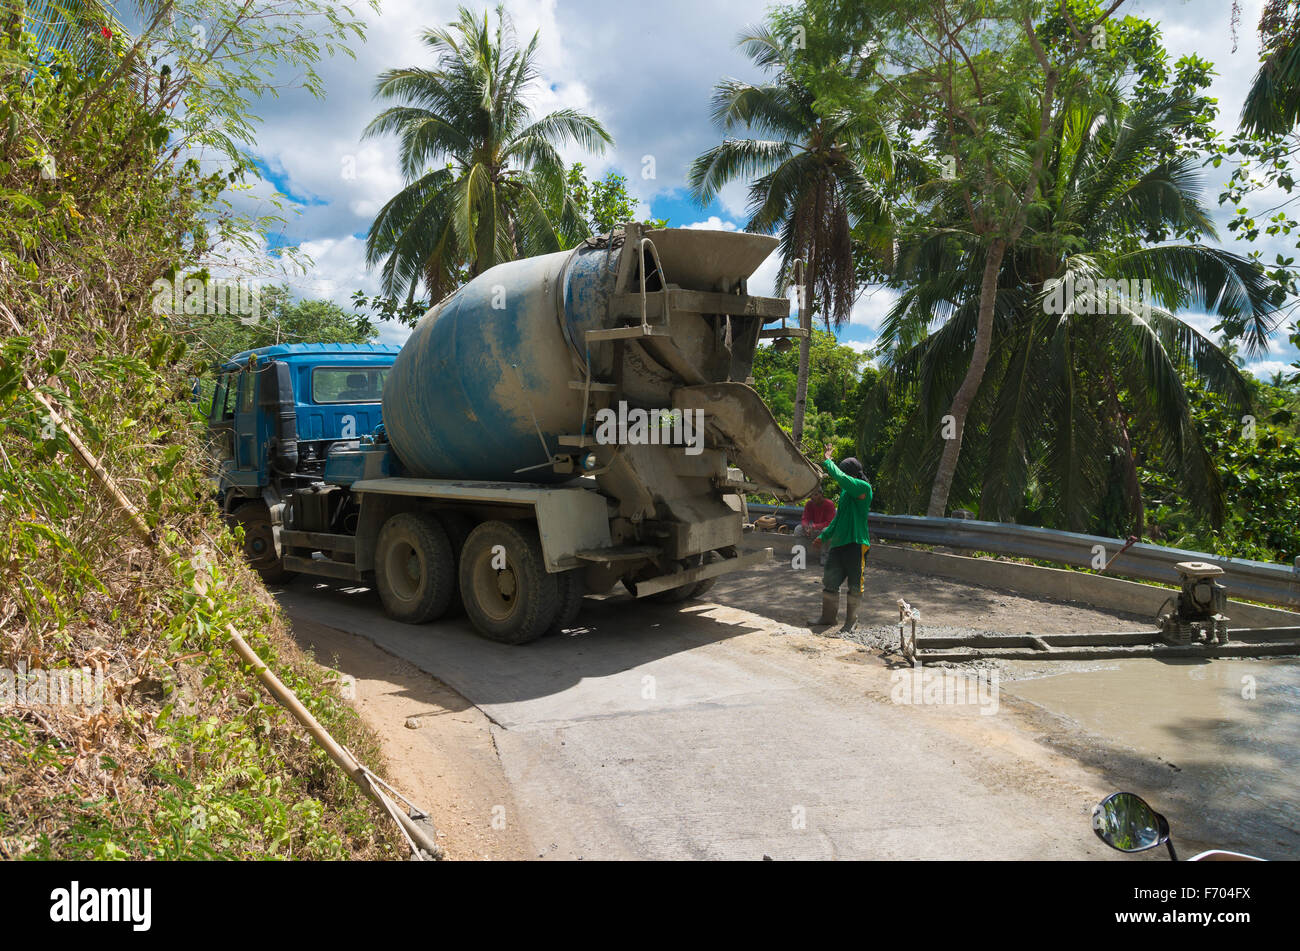 DONSOL, PHILIPPINES - JUNE 2, 2015: Unknown road workers with a cement truck building a new forest road in the philippines Stock Photo